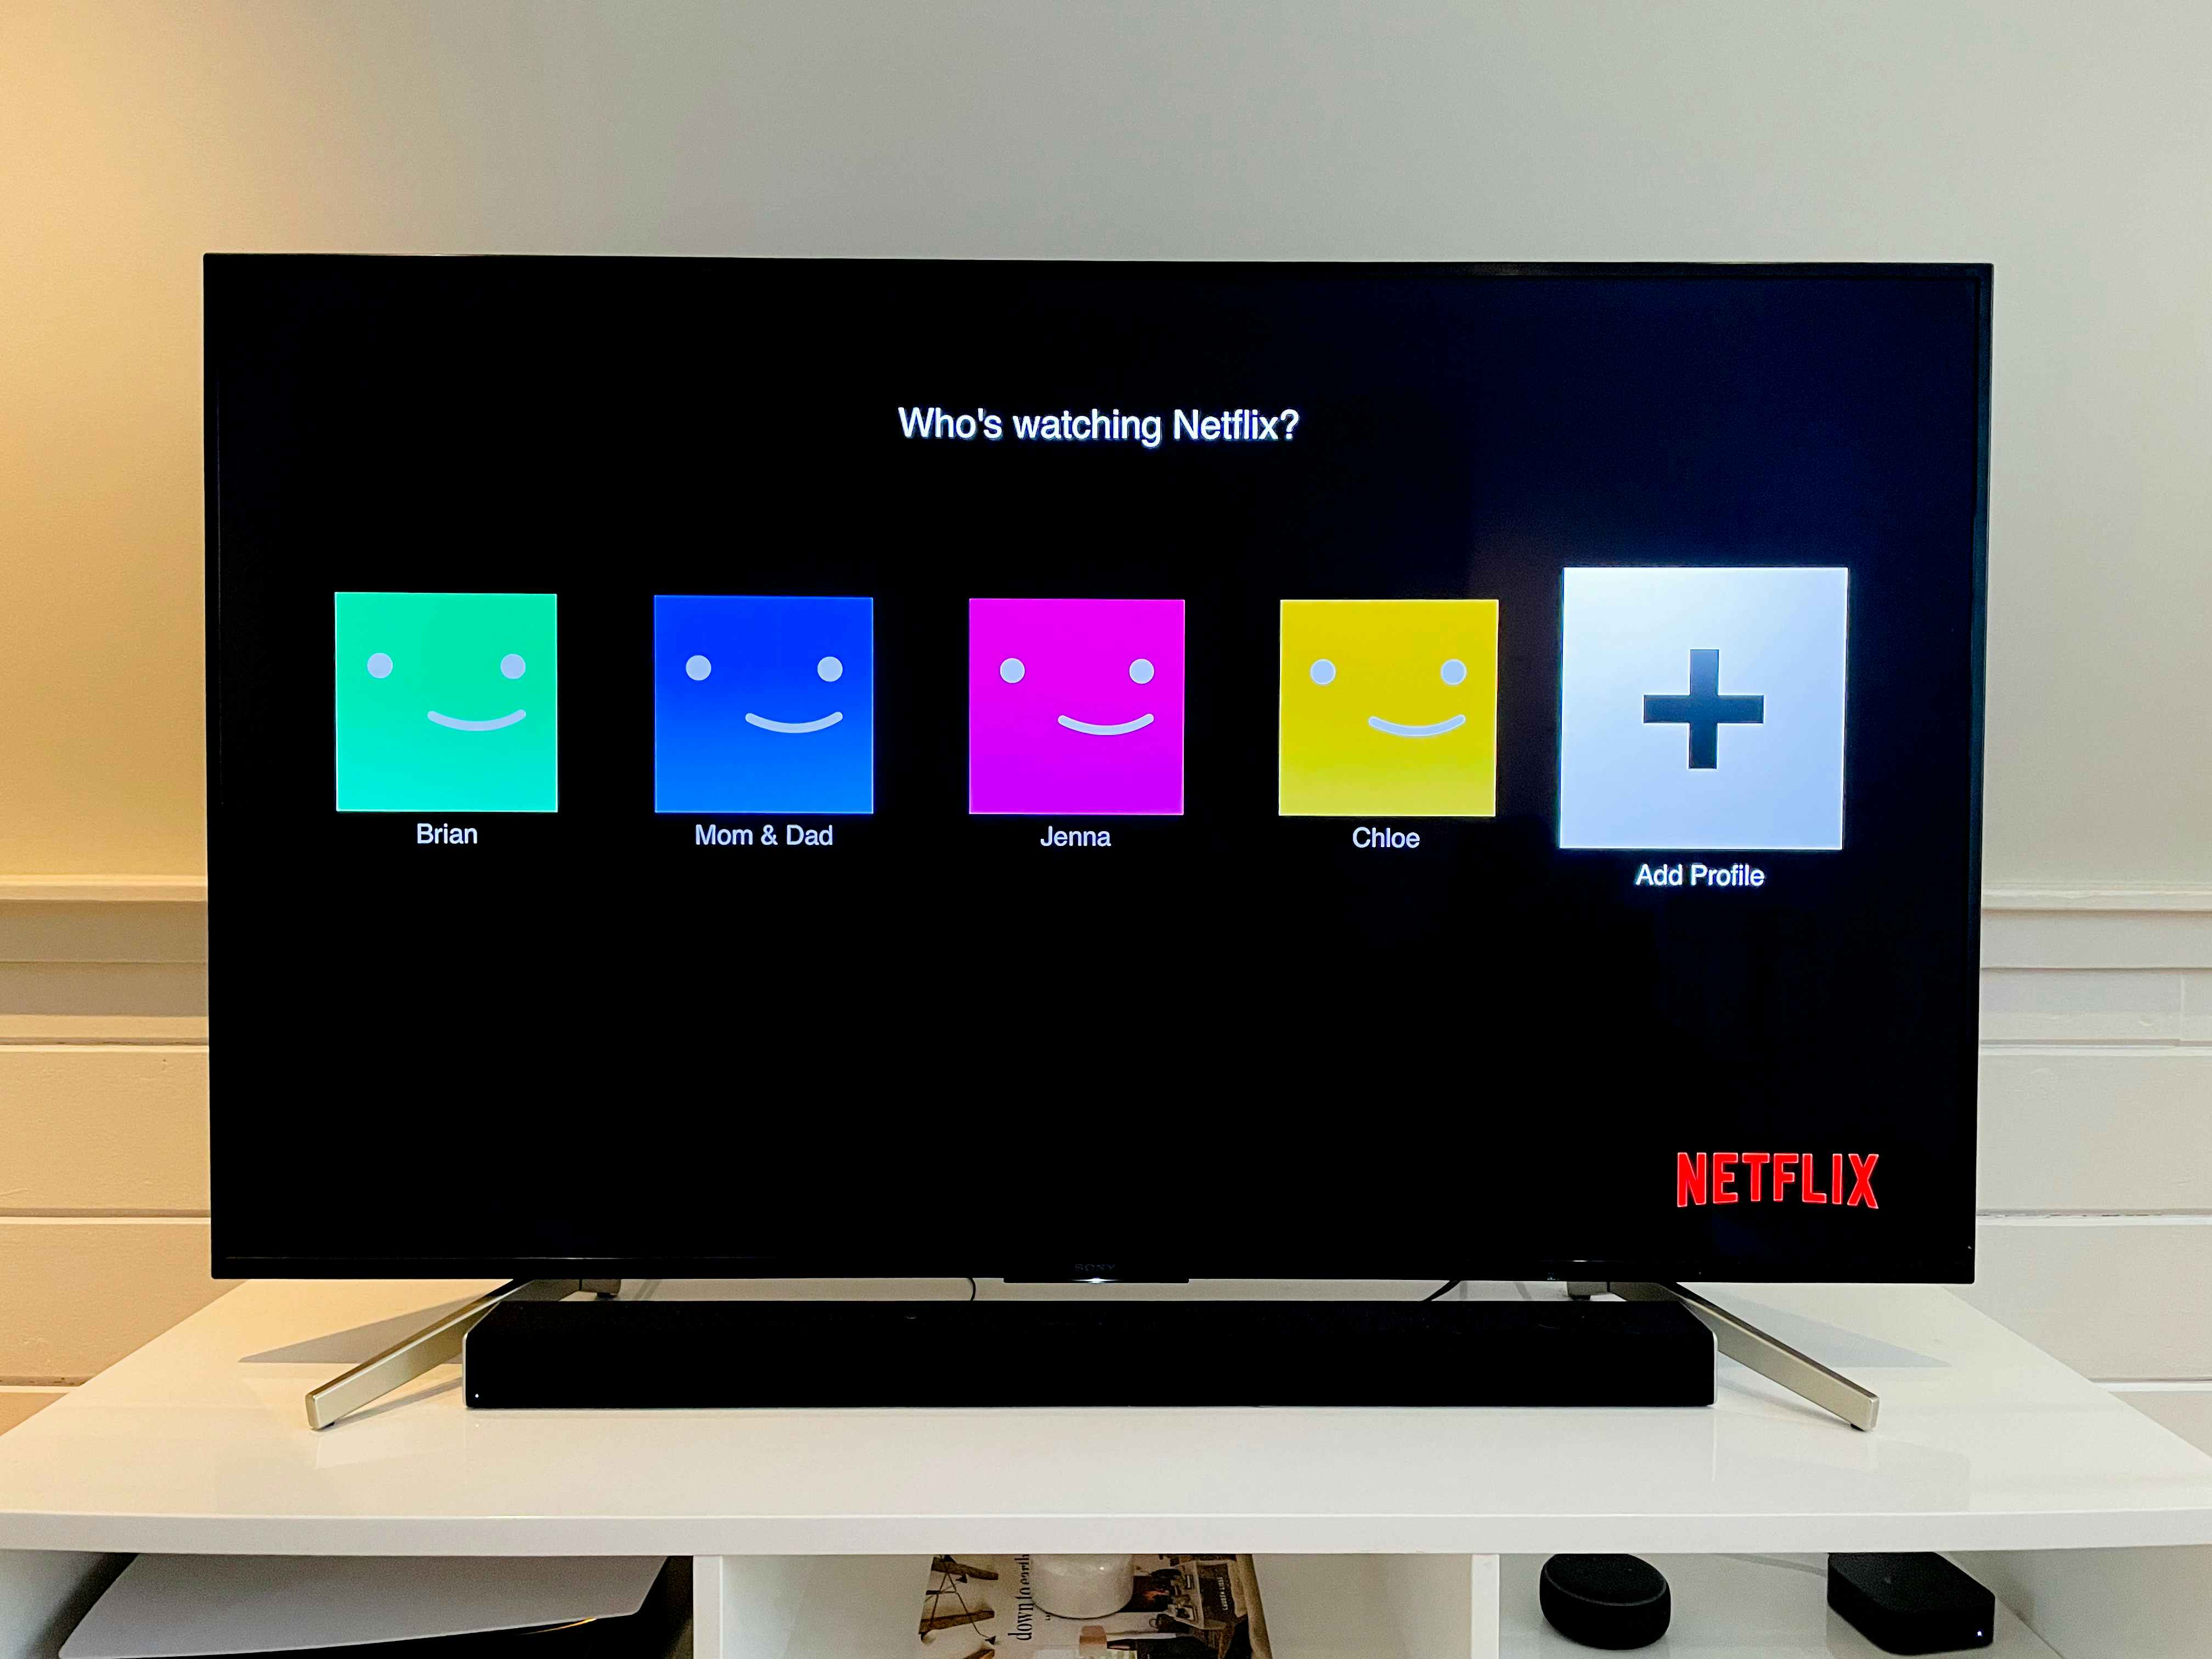 TV screen showing the Netflix app open on the profiles page asking "Who's watching Netflix?